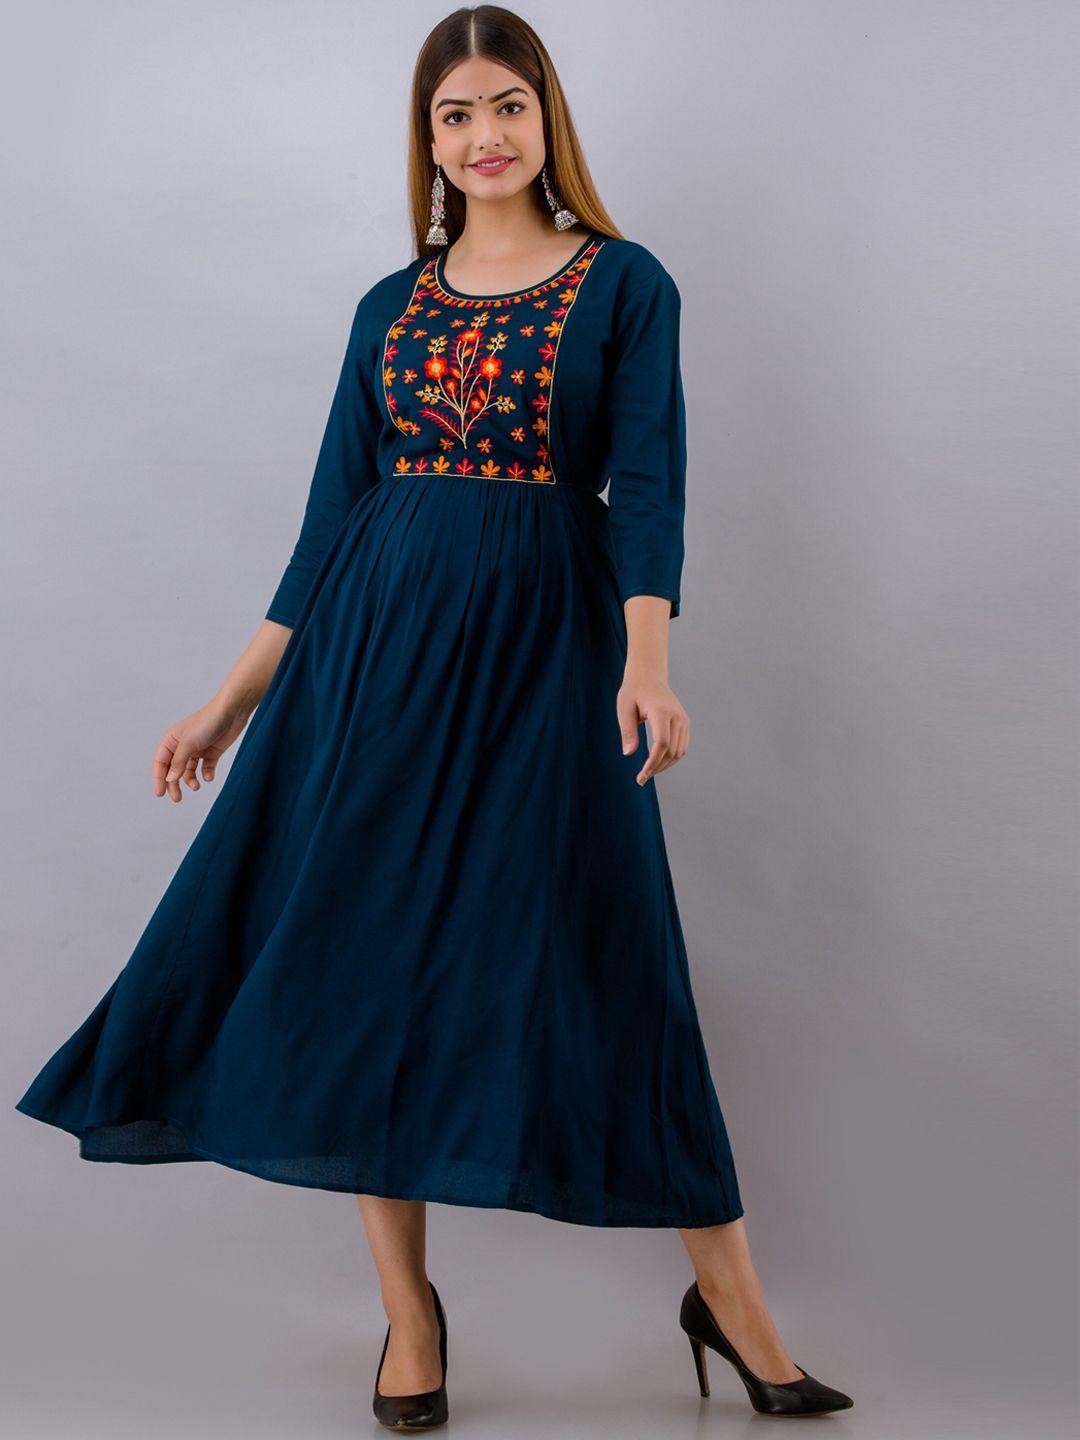 women touch blue ethnic motifs embroidered ethnic midi fit & flare dress